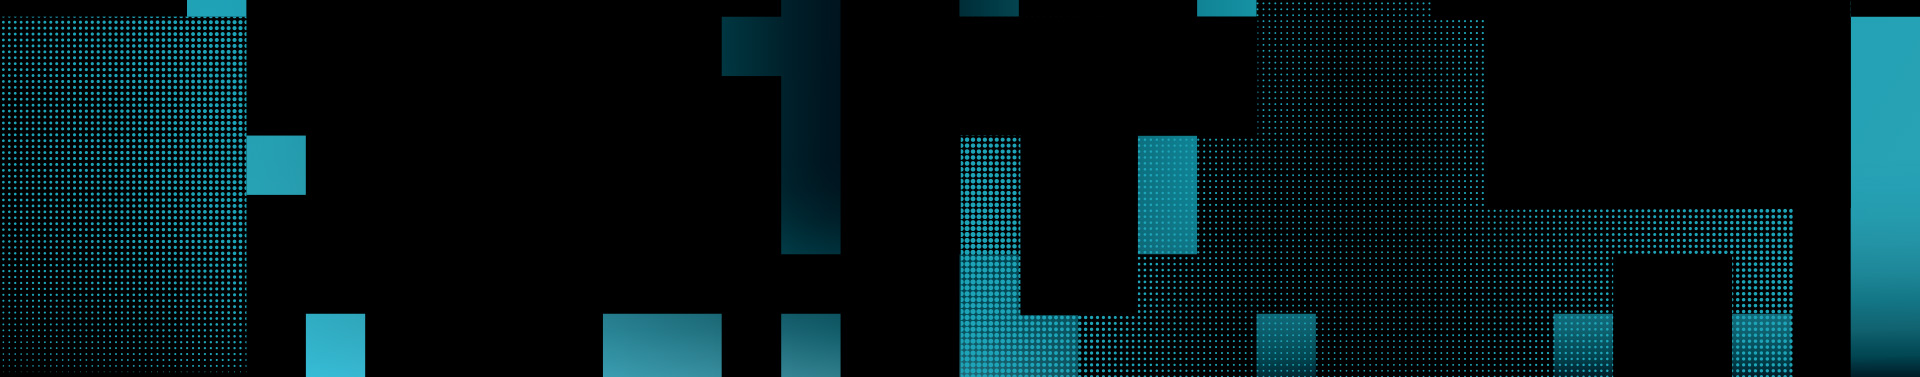 Abstract digital pattern of pixelated blocks in varying shades of blue on a dark background, representing the theme of the Knight Media Forum 2024.